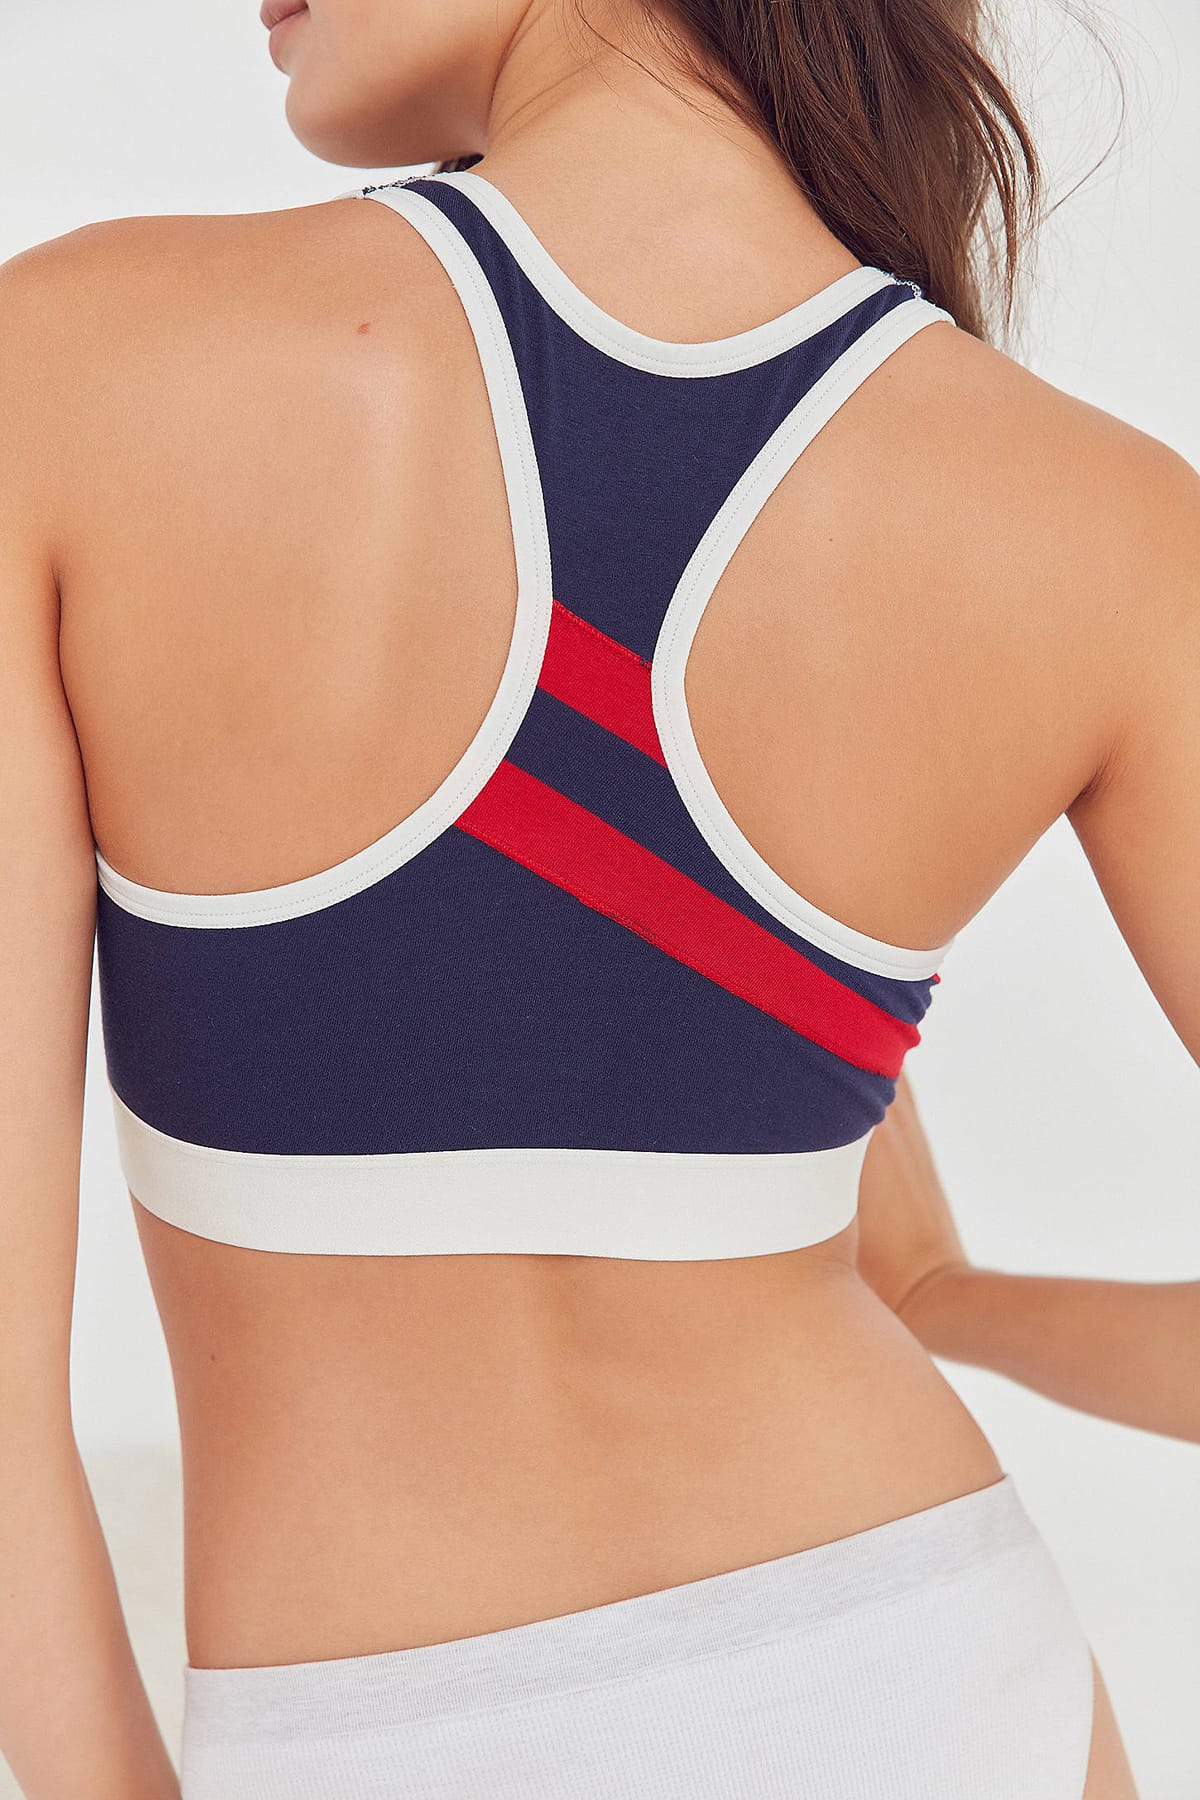 tommy hilfiger bra urban outfitters